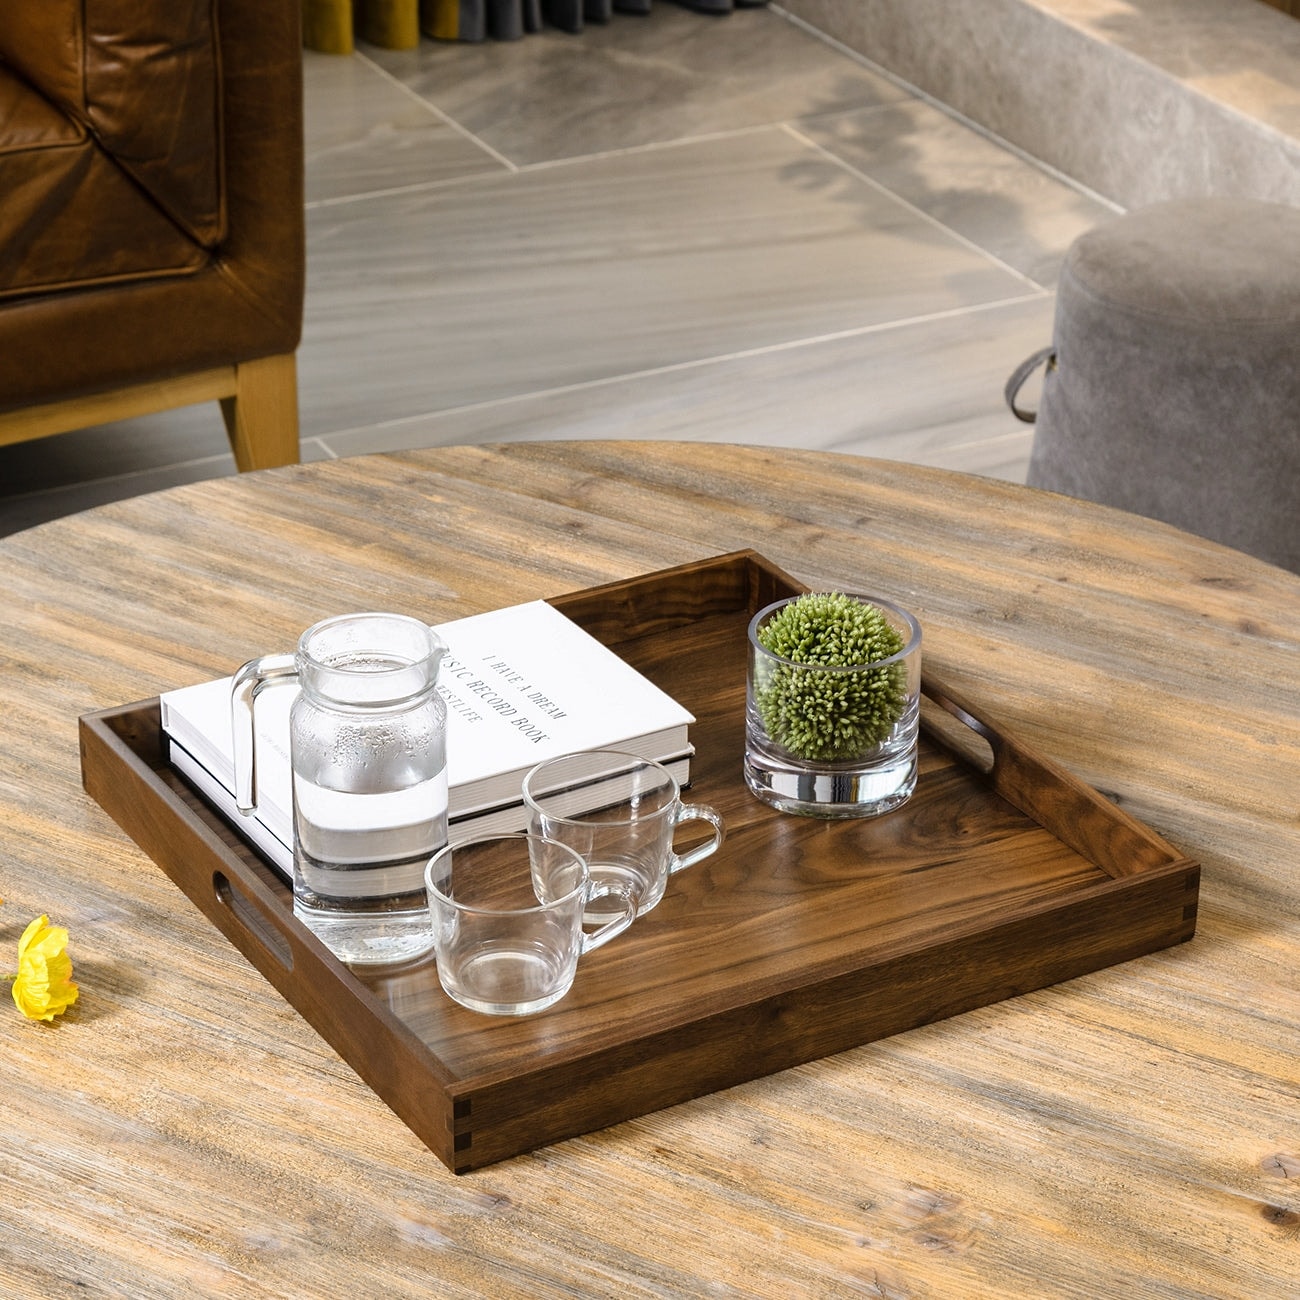 https://ak1.ostkcdn.com/images/products/is/images/direct/587233e6fa561f5efff4df9d0a7b5415185b35ba/Square-Black-Walnut-Wood-Serving-Tray-Ottoman-Tray-with-Handles.jpg